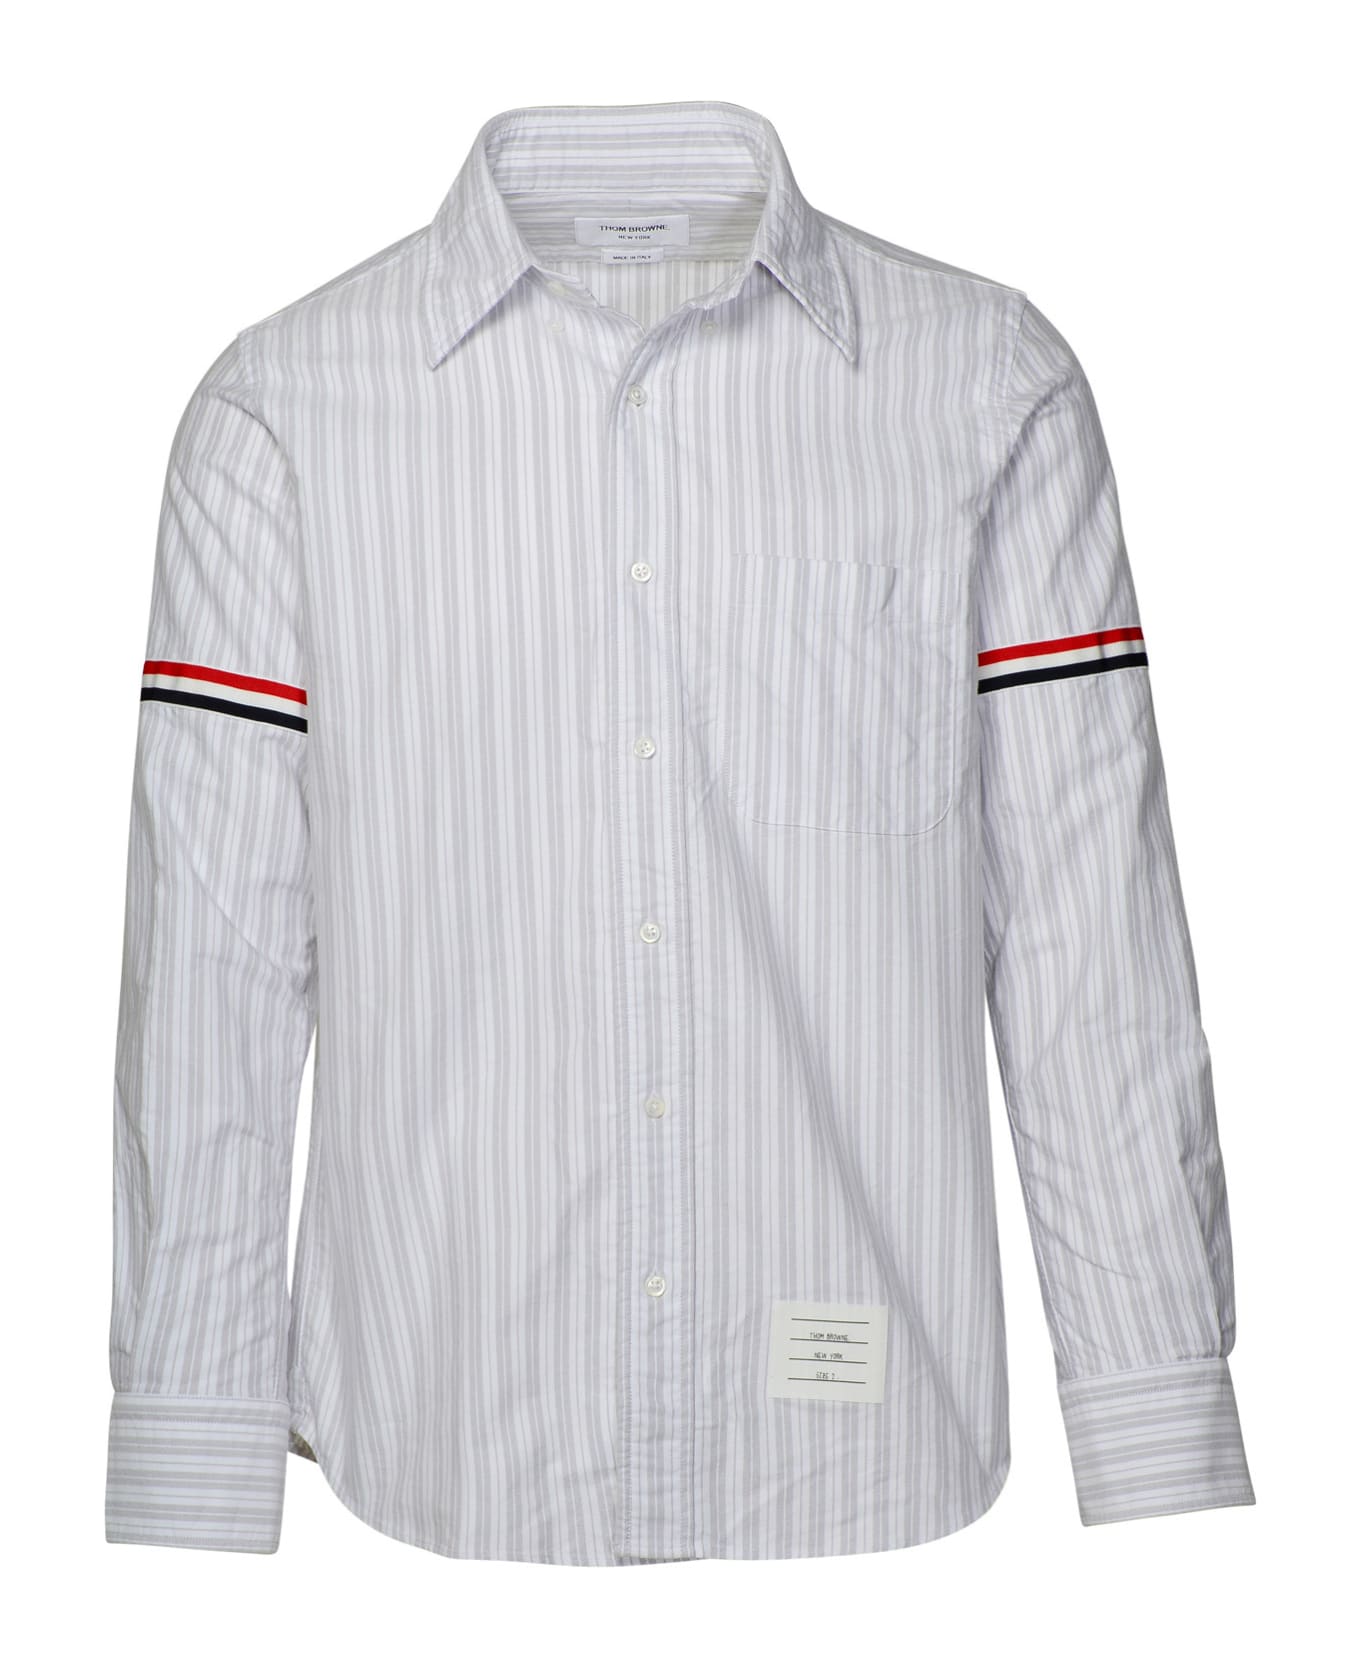 Thom Browne Two-tone Cotton Shirt - Med Grey